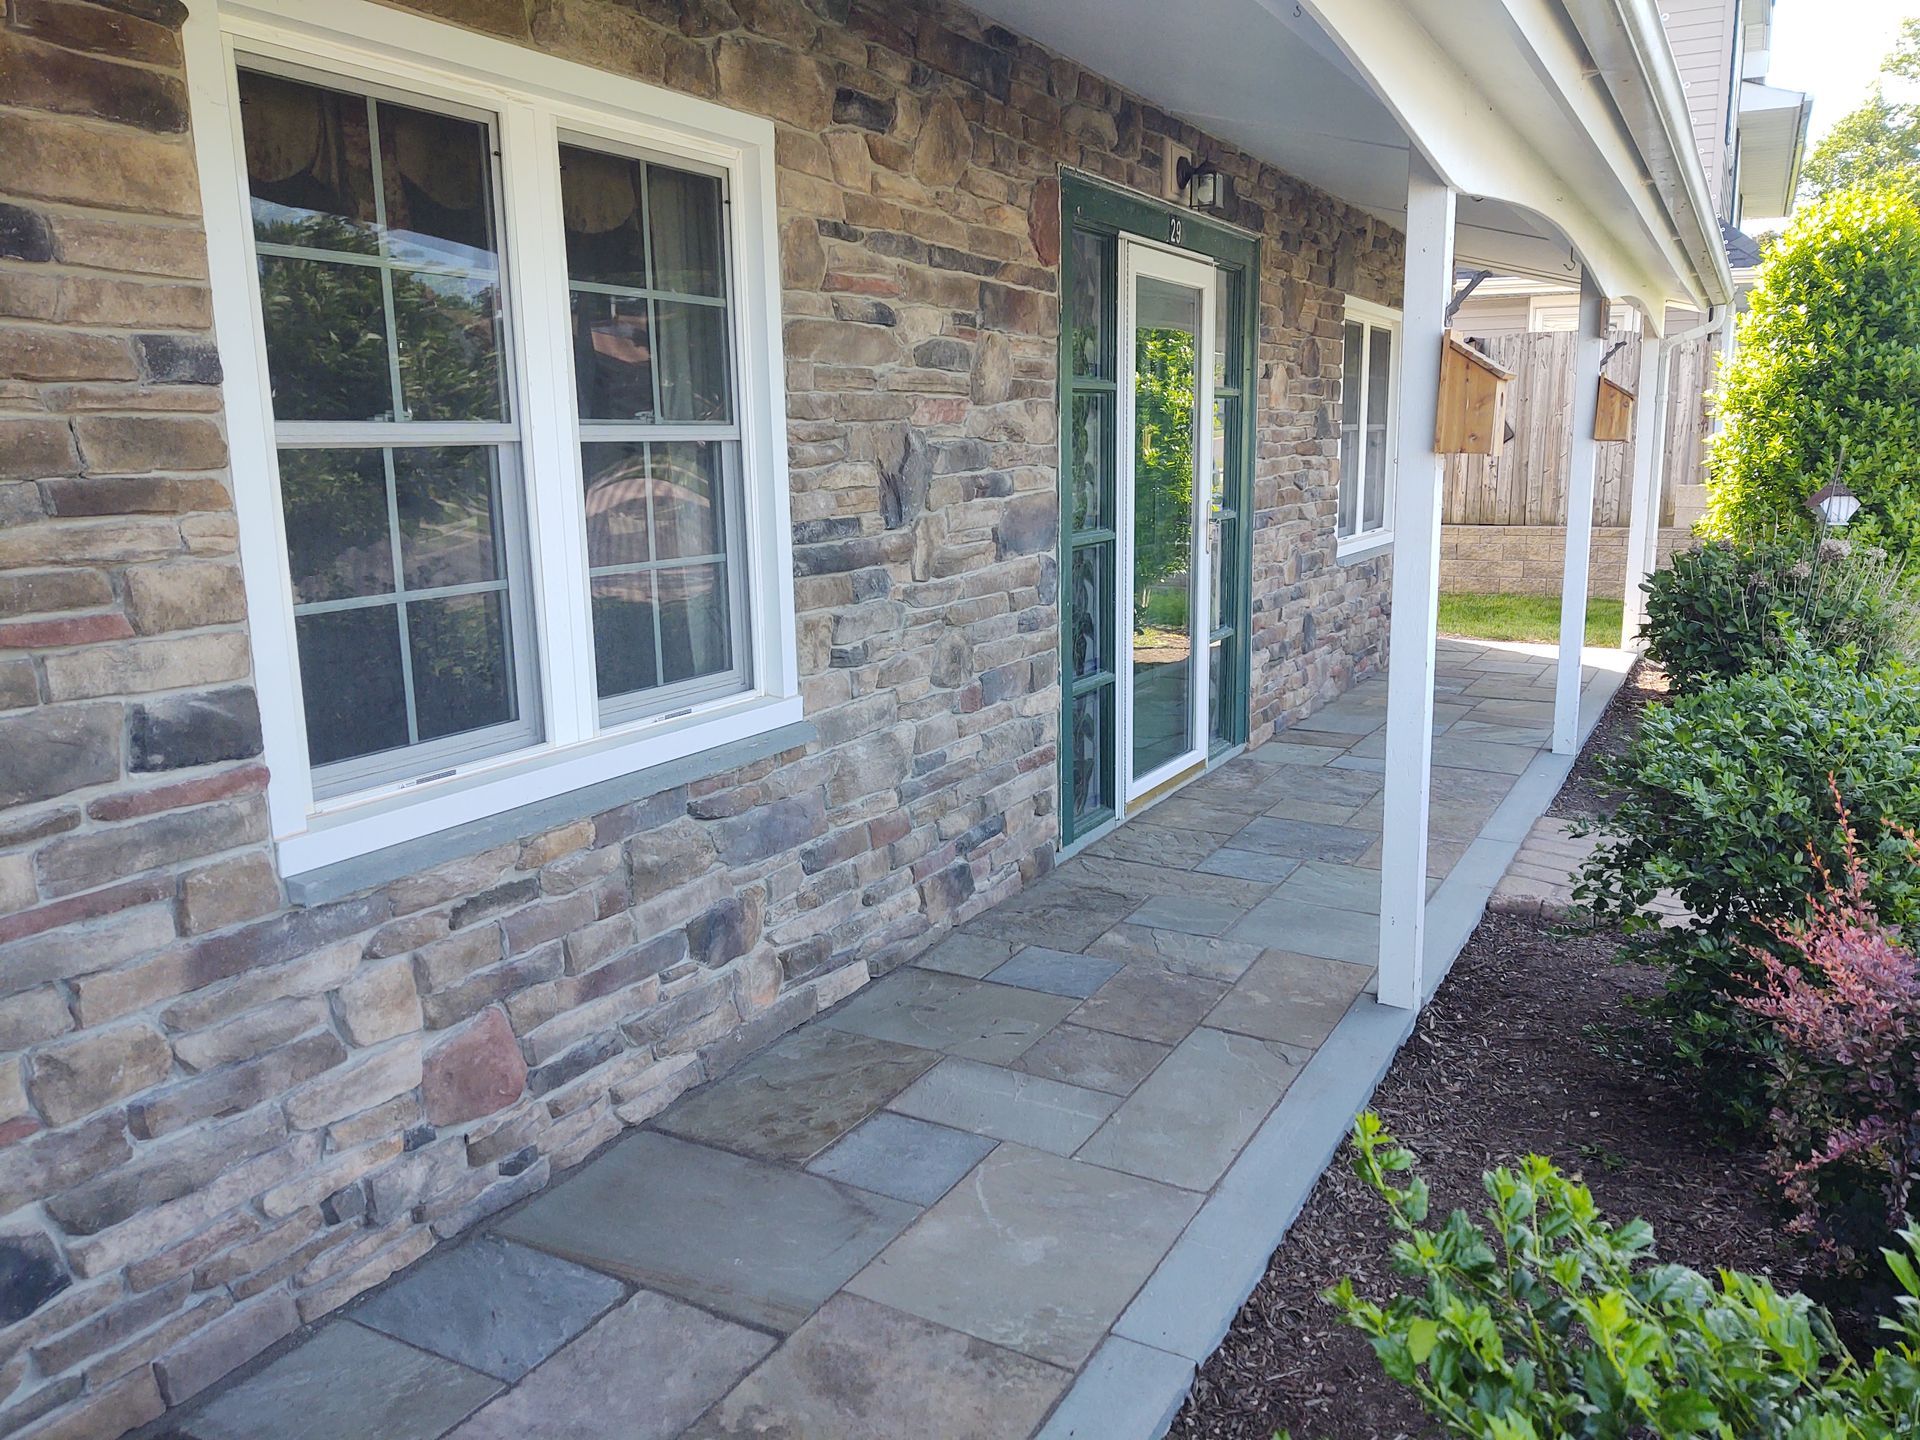 Beautiful Stone Fronts - A Large House With Stone Fronts in Langhorne, PA